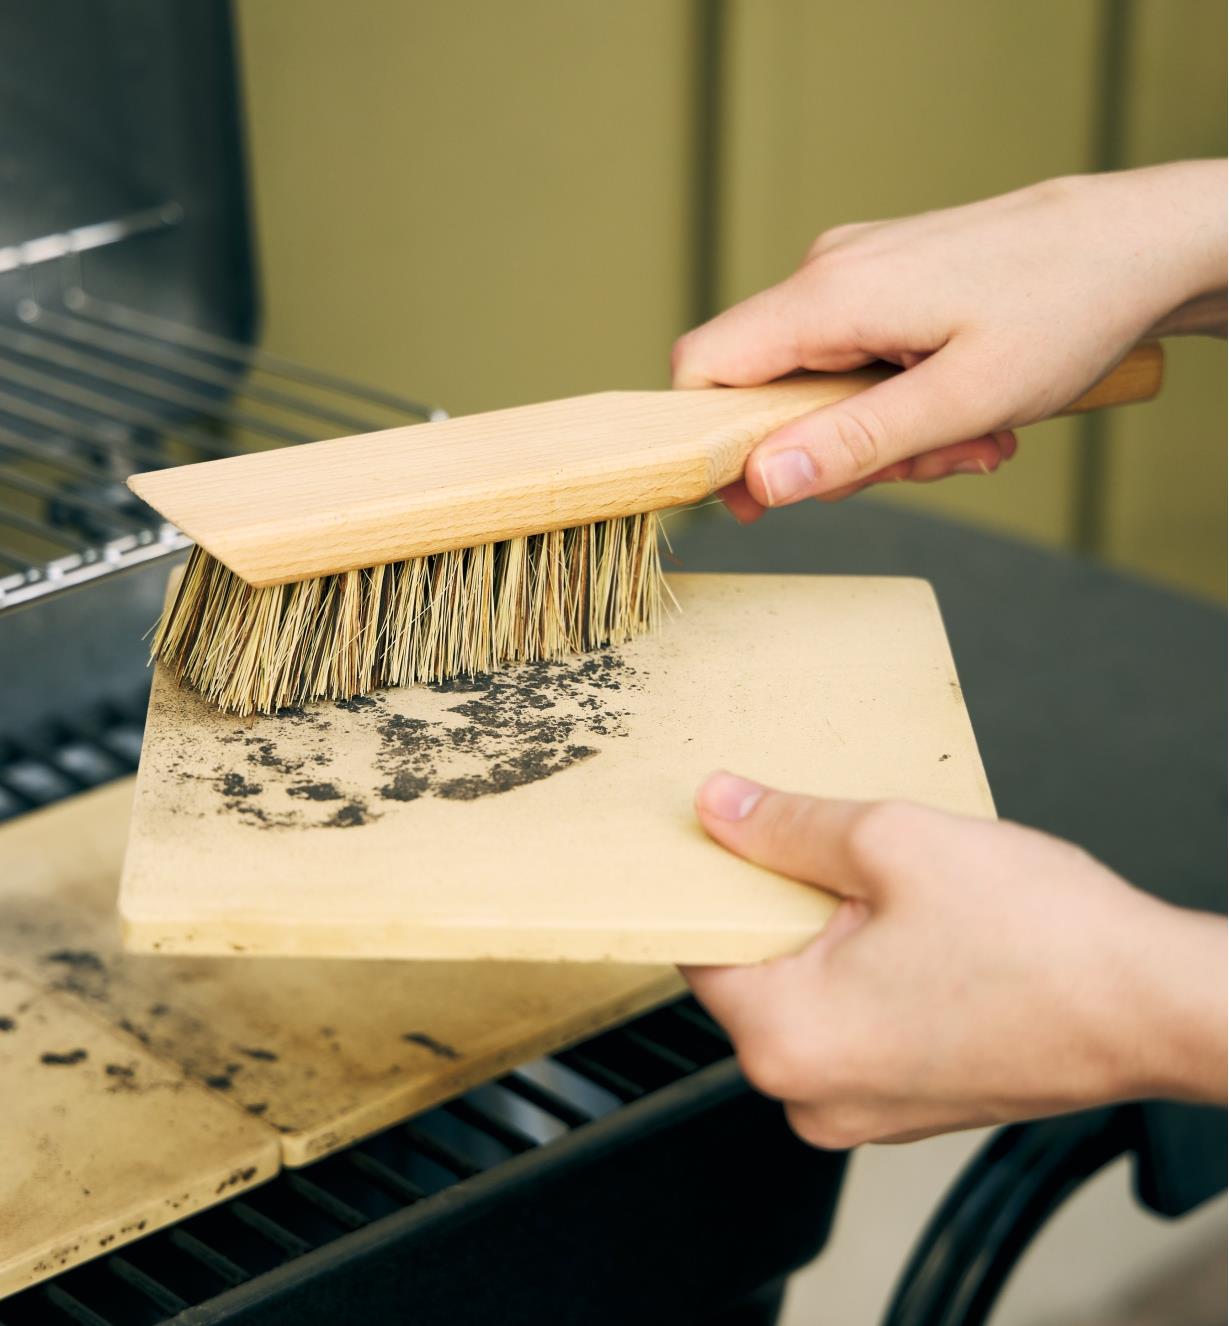 Using the toolshed brush to clean a barbecue pizza stone